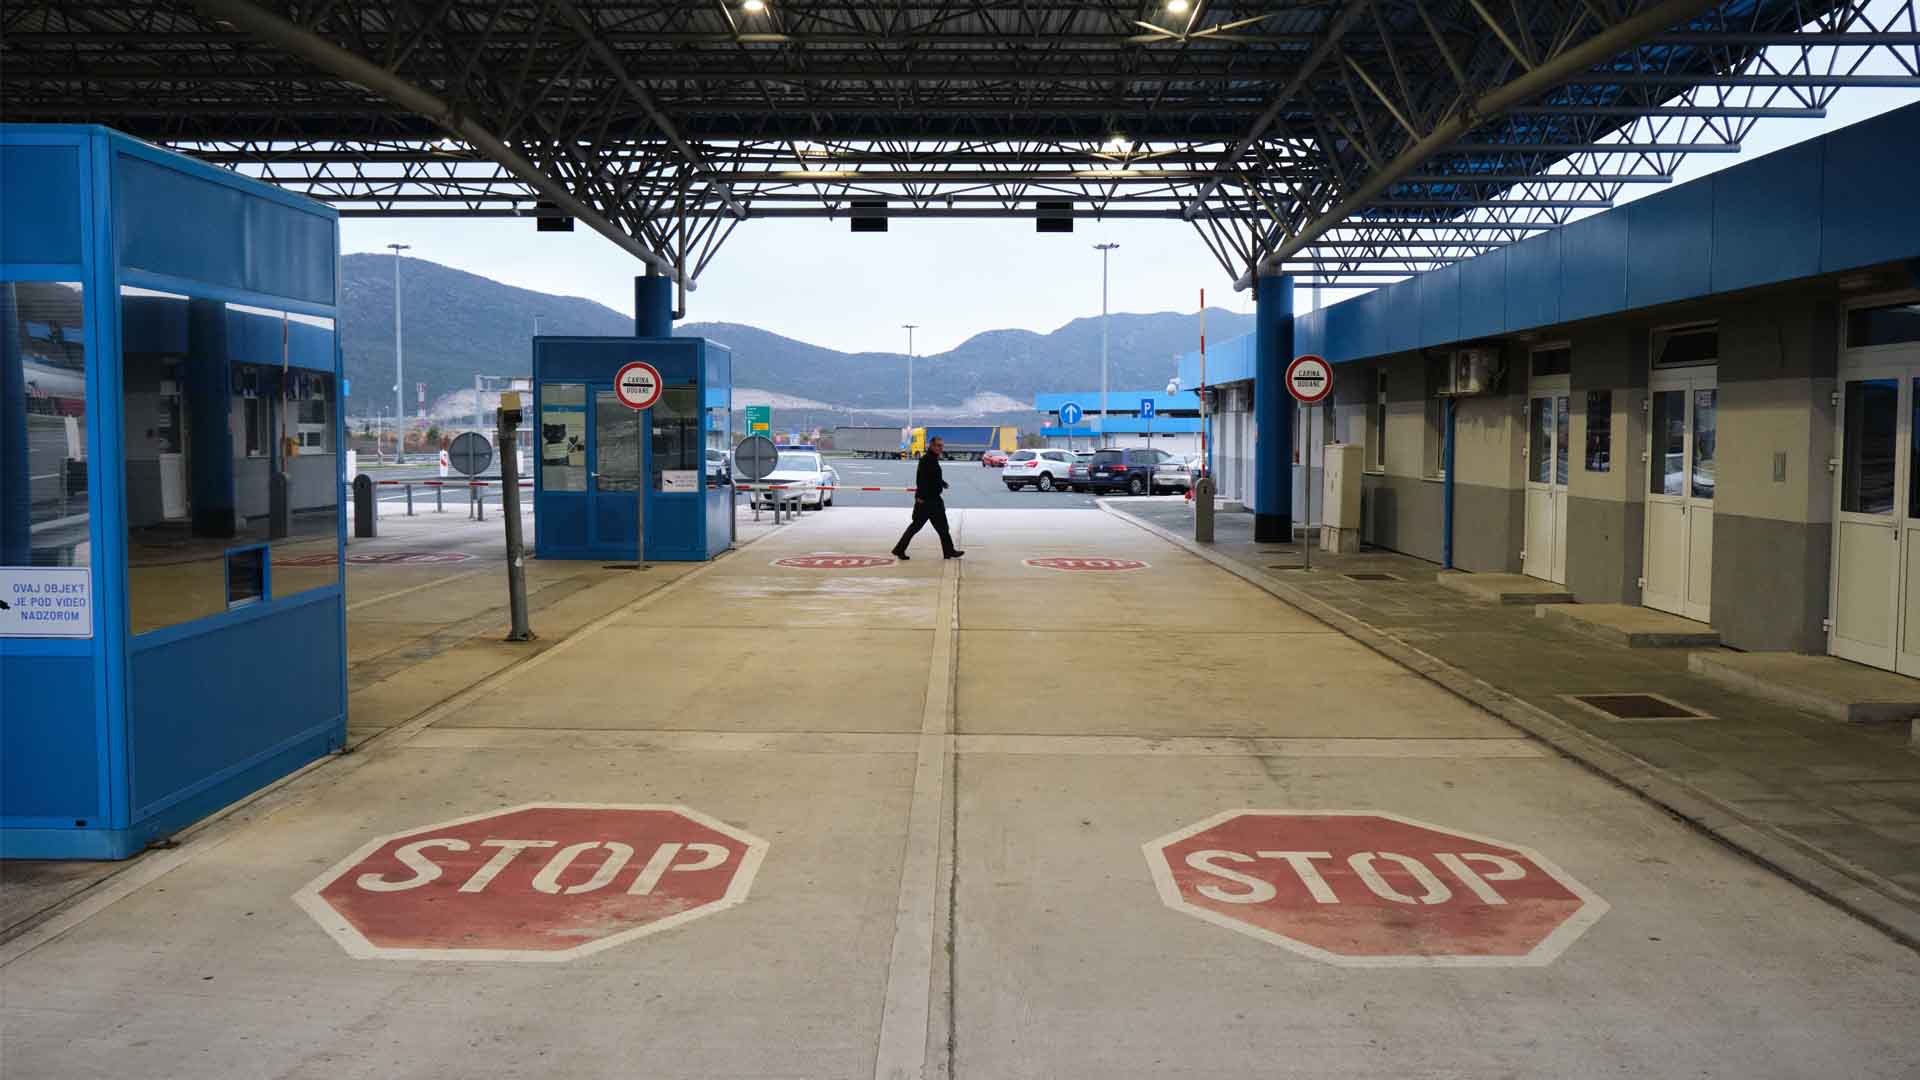 This is a picture of the Croatian customs on the border with Bosnia and Herzegovina. We see the pavement in the foreground of the picture. Two large STOP signs are painted on the ground. Further down we see two boom barriers/traffic barriers. A person walks through the center of the frame in front of the barriers.